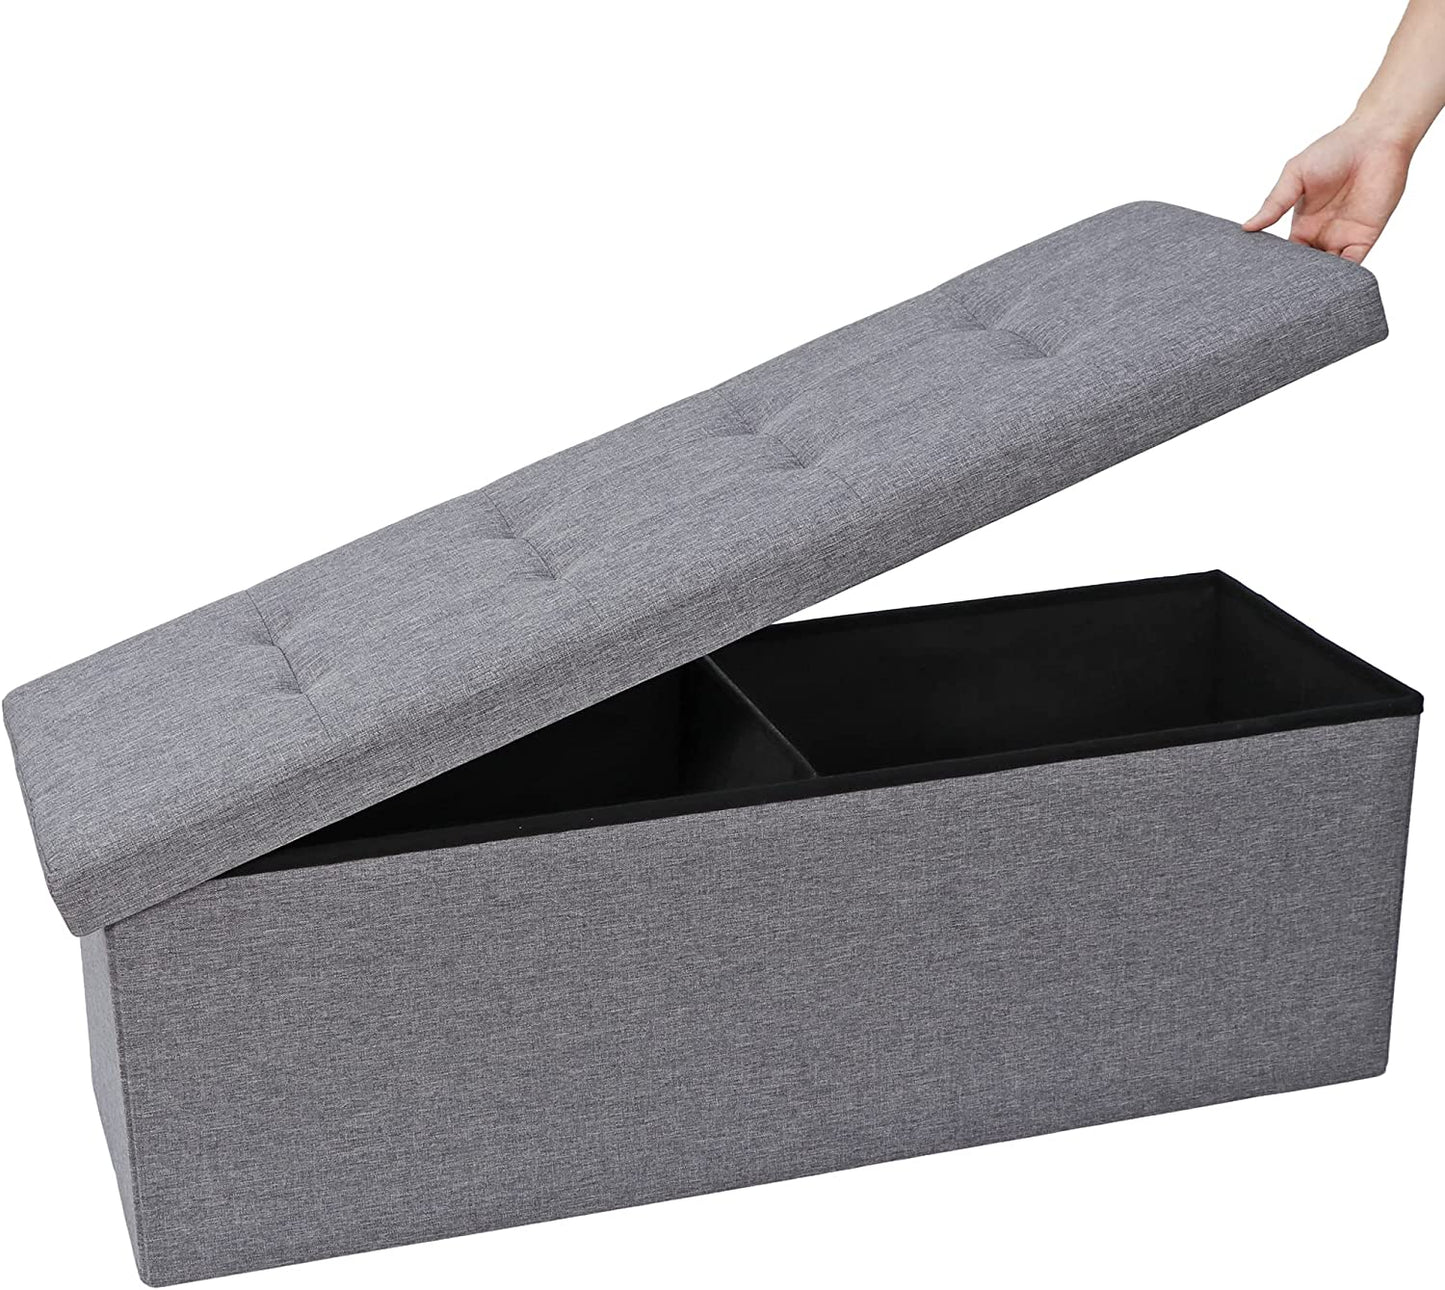 43.3 inches Folding Storage Ottoman Bench Storage Chest Footrest with Foam Padded Seat, Great for Bedroom, Entryway and Living Room, Holds up to 660 lb, Dark Gray